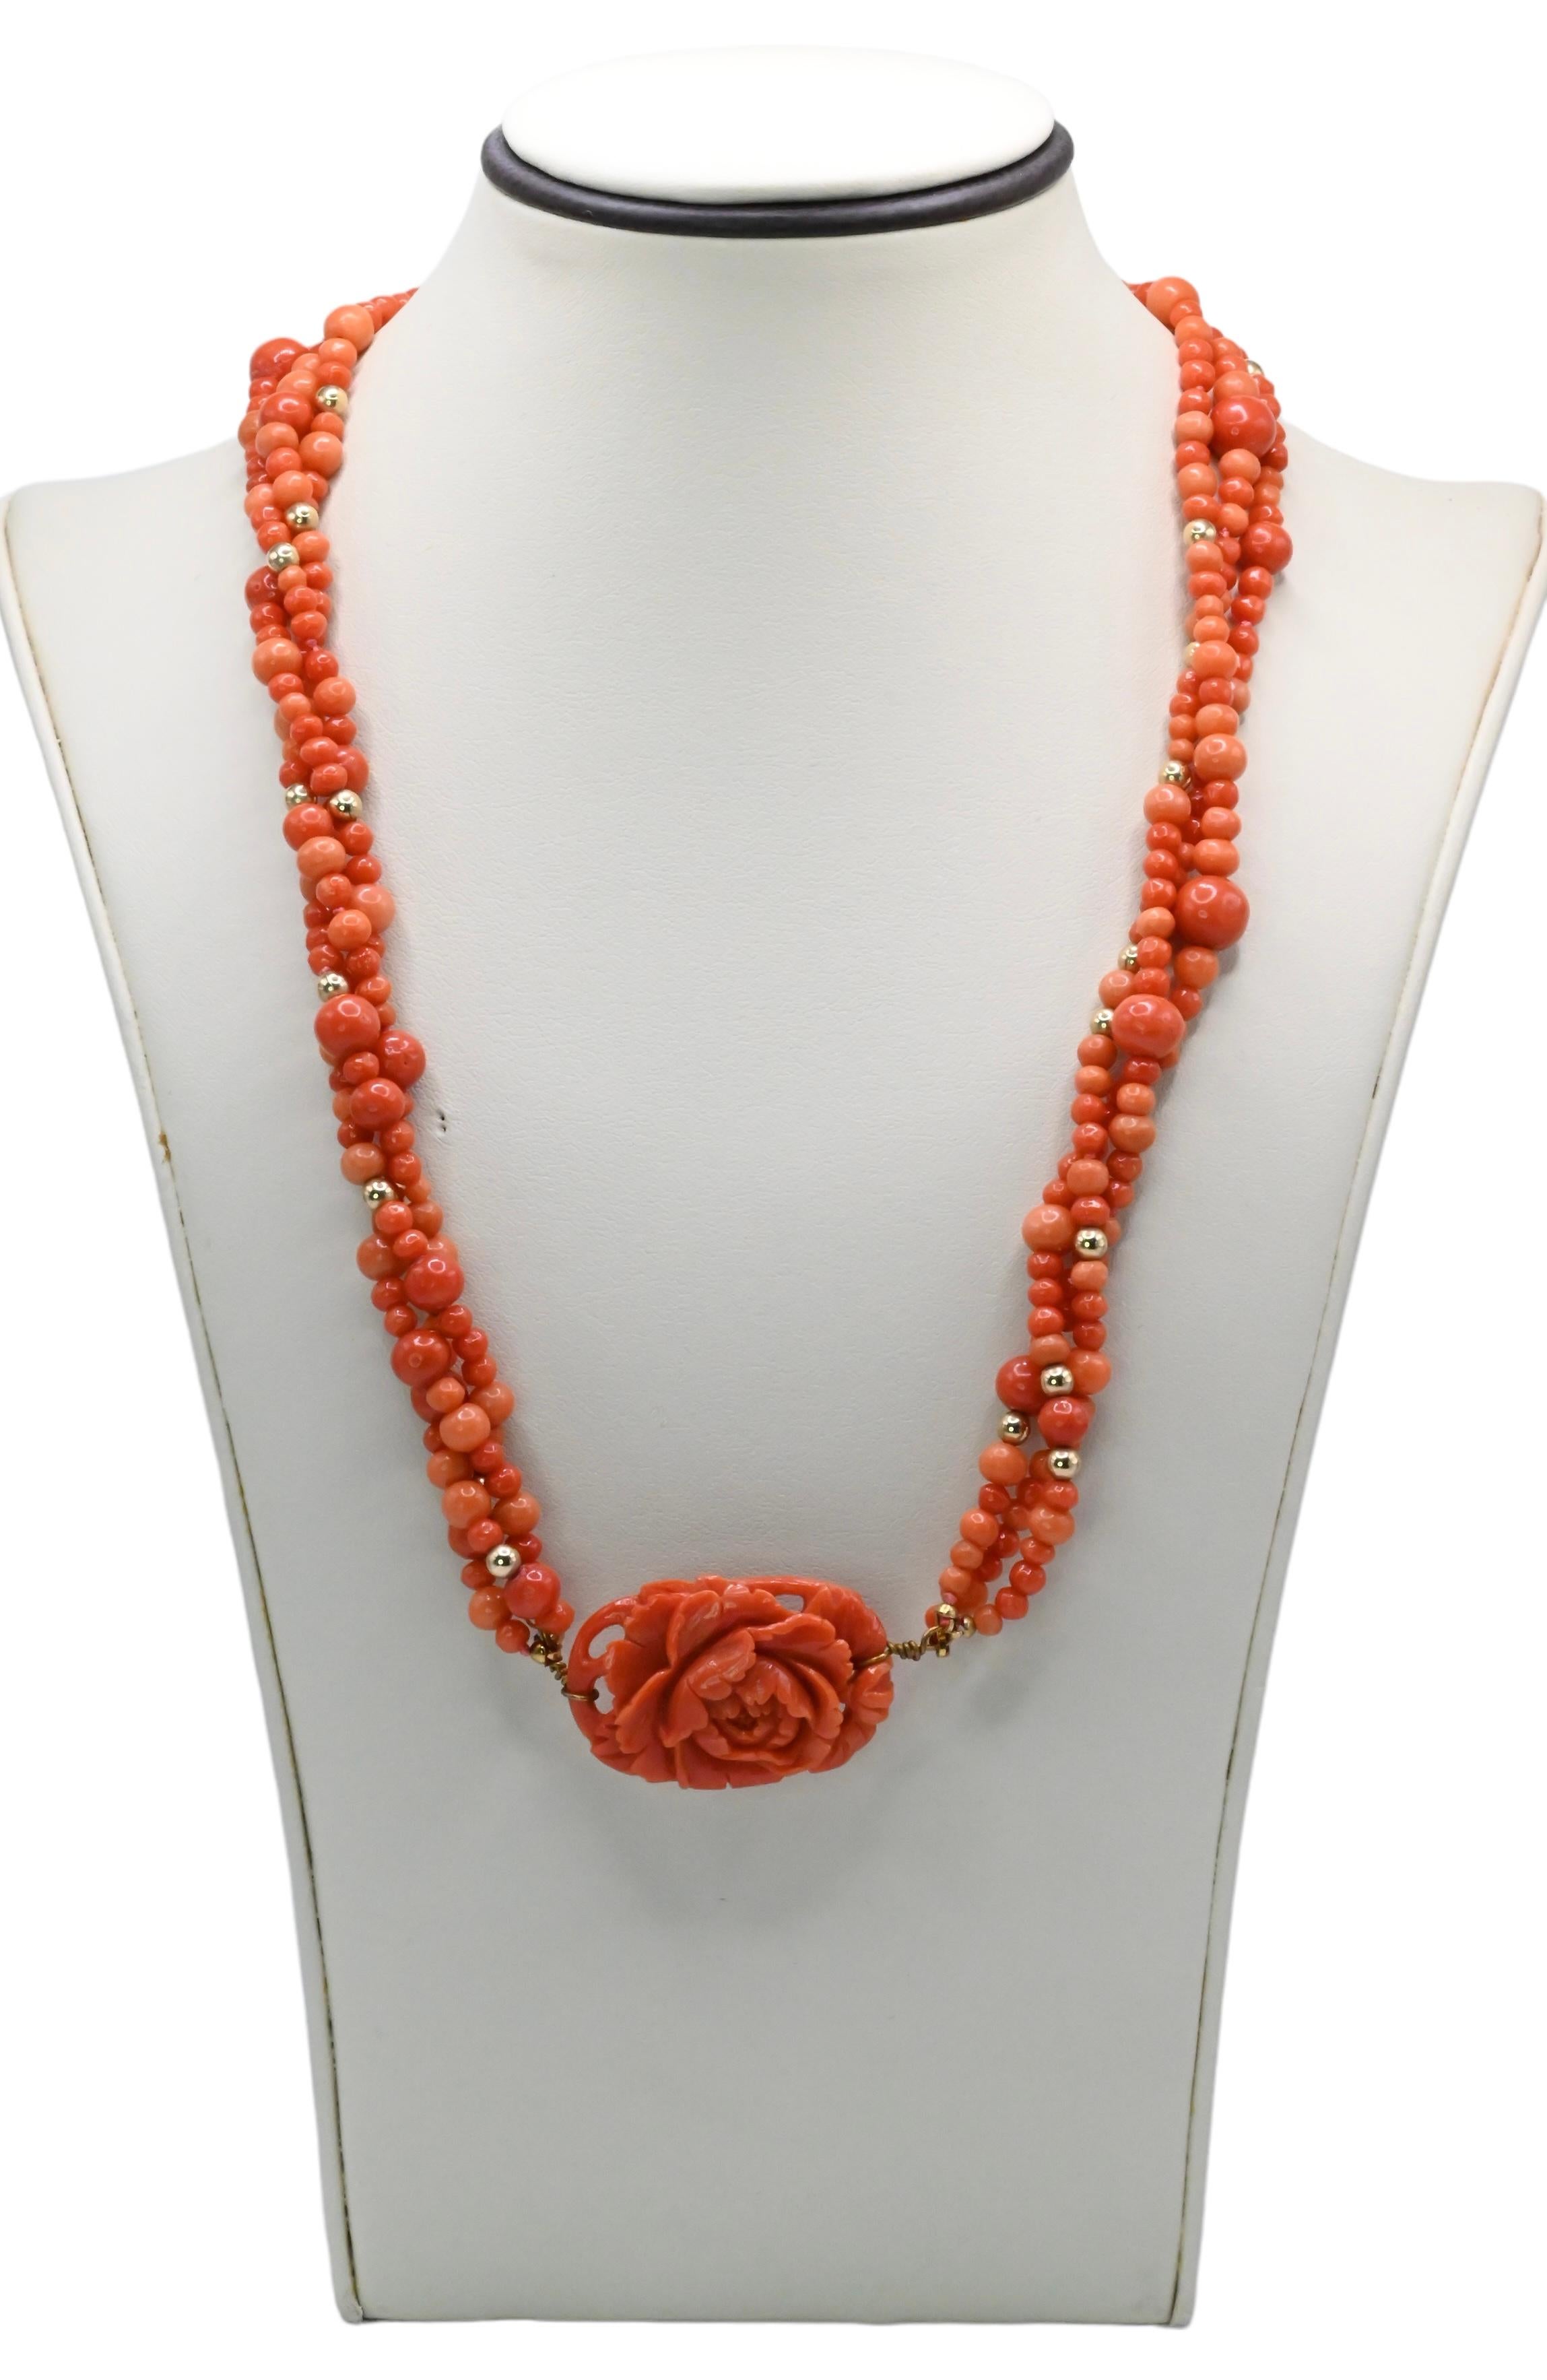 Gorgeous Antique Coral Necklace Fine Quality 99 Grams 

Superb quality with round beads with gold color spacers. It has a very fine quality coral floral pendant as well. The weight is 99 grams. The condition is very good with no major issues it is